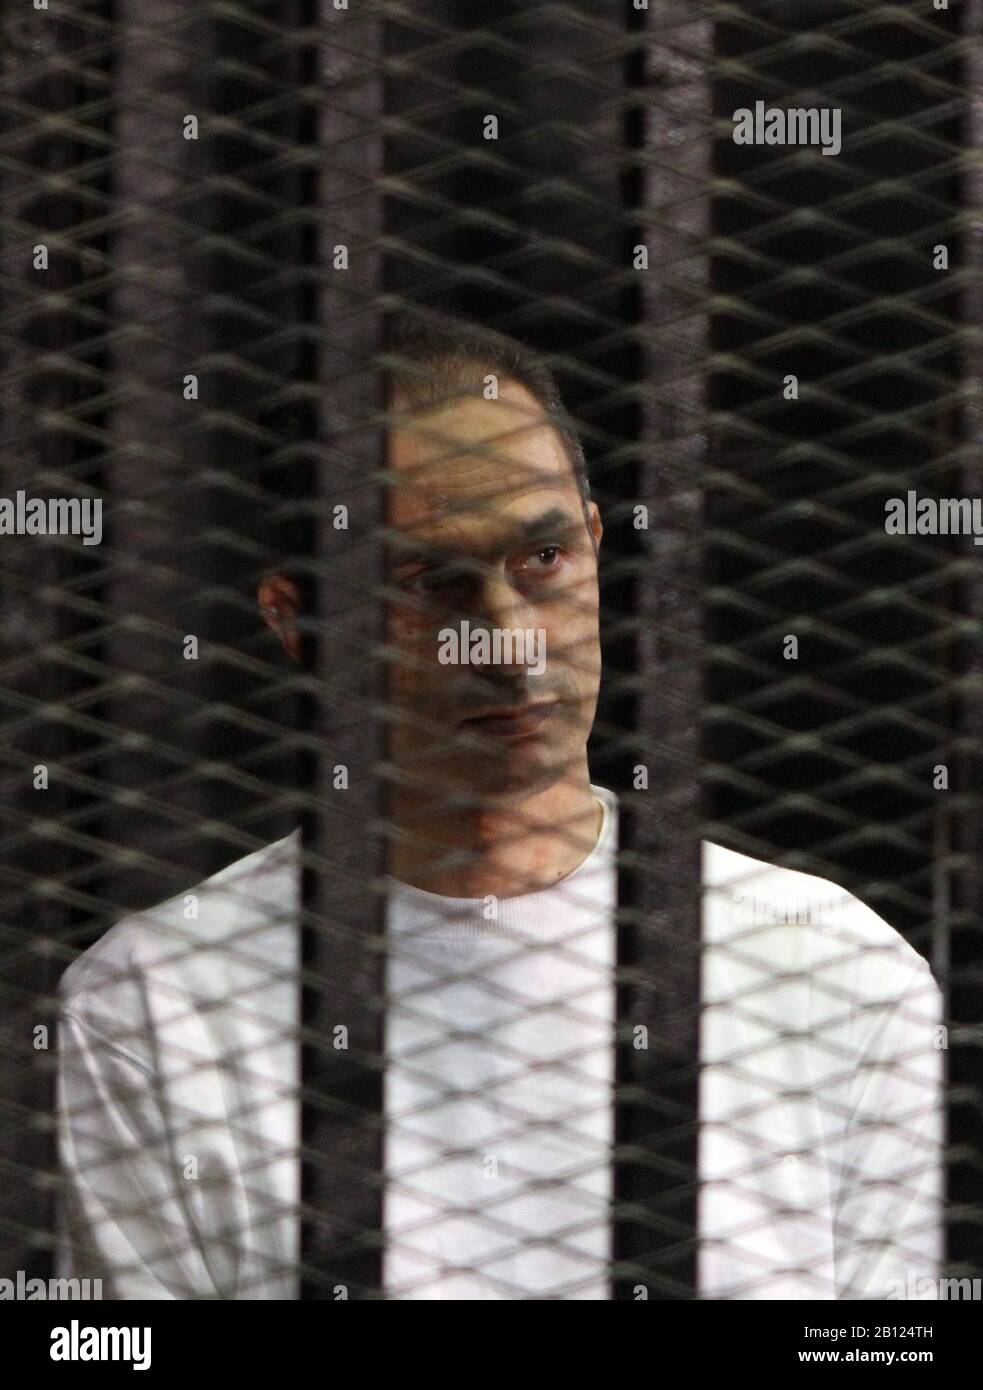 (200222) -- CAIRO, Feb. 22, 2020 (Xinhua) -- File photo taken on July 9, 2012 shows Gamal Mubarak, son of ousted Egyptian president Mohamed Hosni Mubarak, in a court in Cairo, Egypt. An Egyptian court acquitted on Saturday Alaa and Gamal Mubarak, the sons of ousted Egyptian president Mohamed Hosni Mubarak, in a corruption case, state-run Ahram Online news website reported. (Xinhua/Ahmed Gomaa) Stock Photo